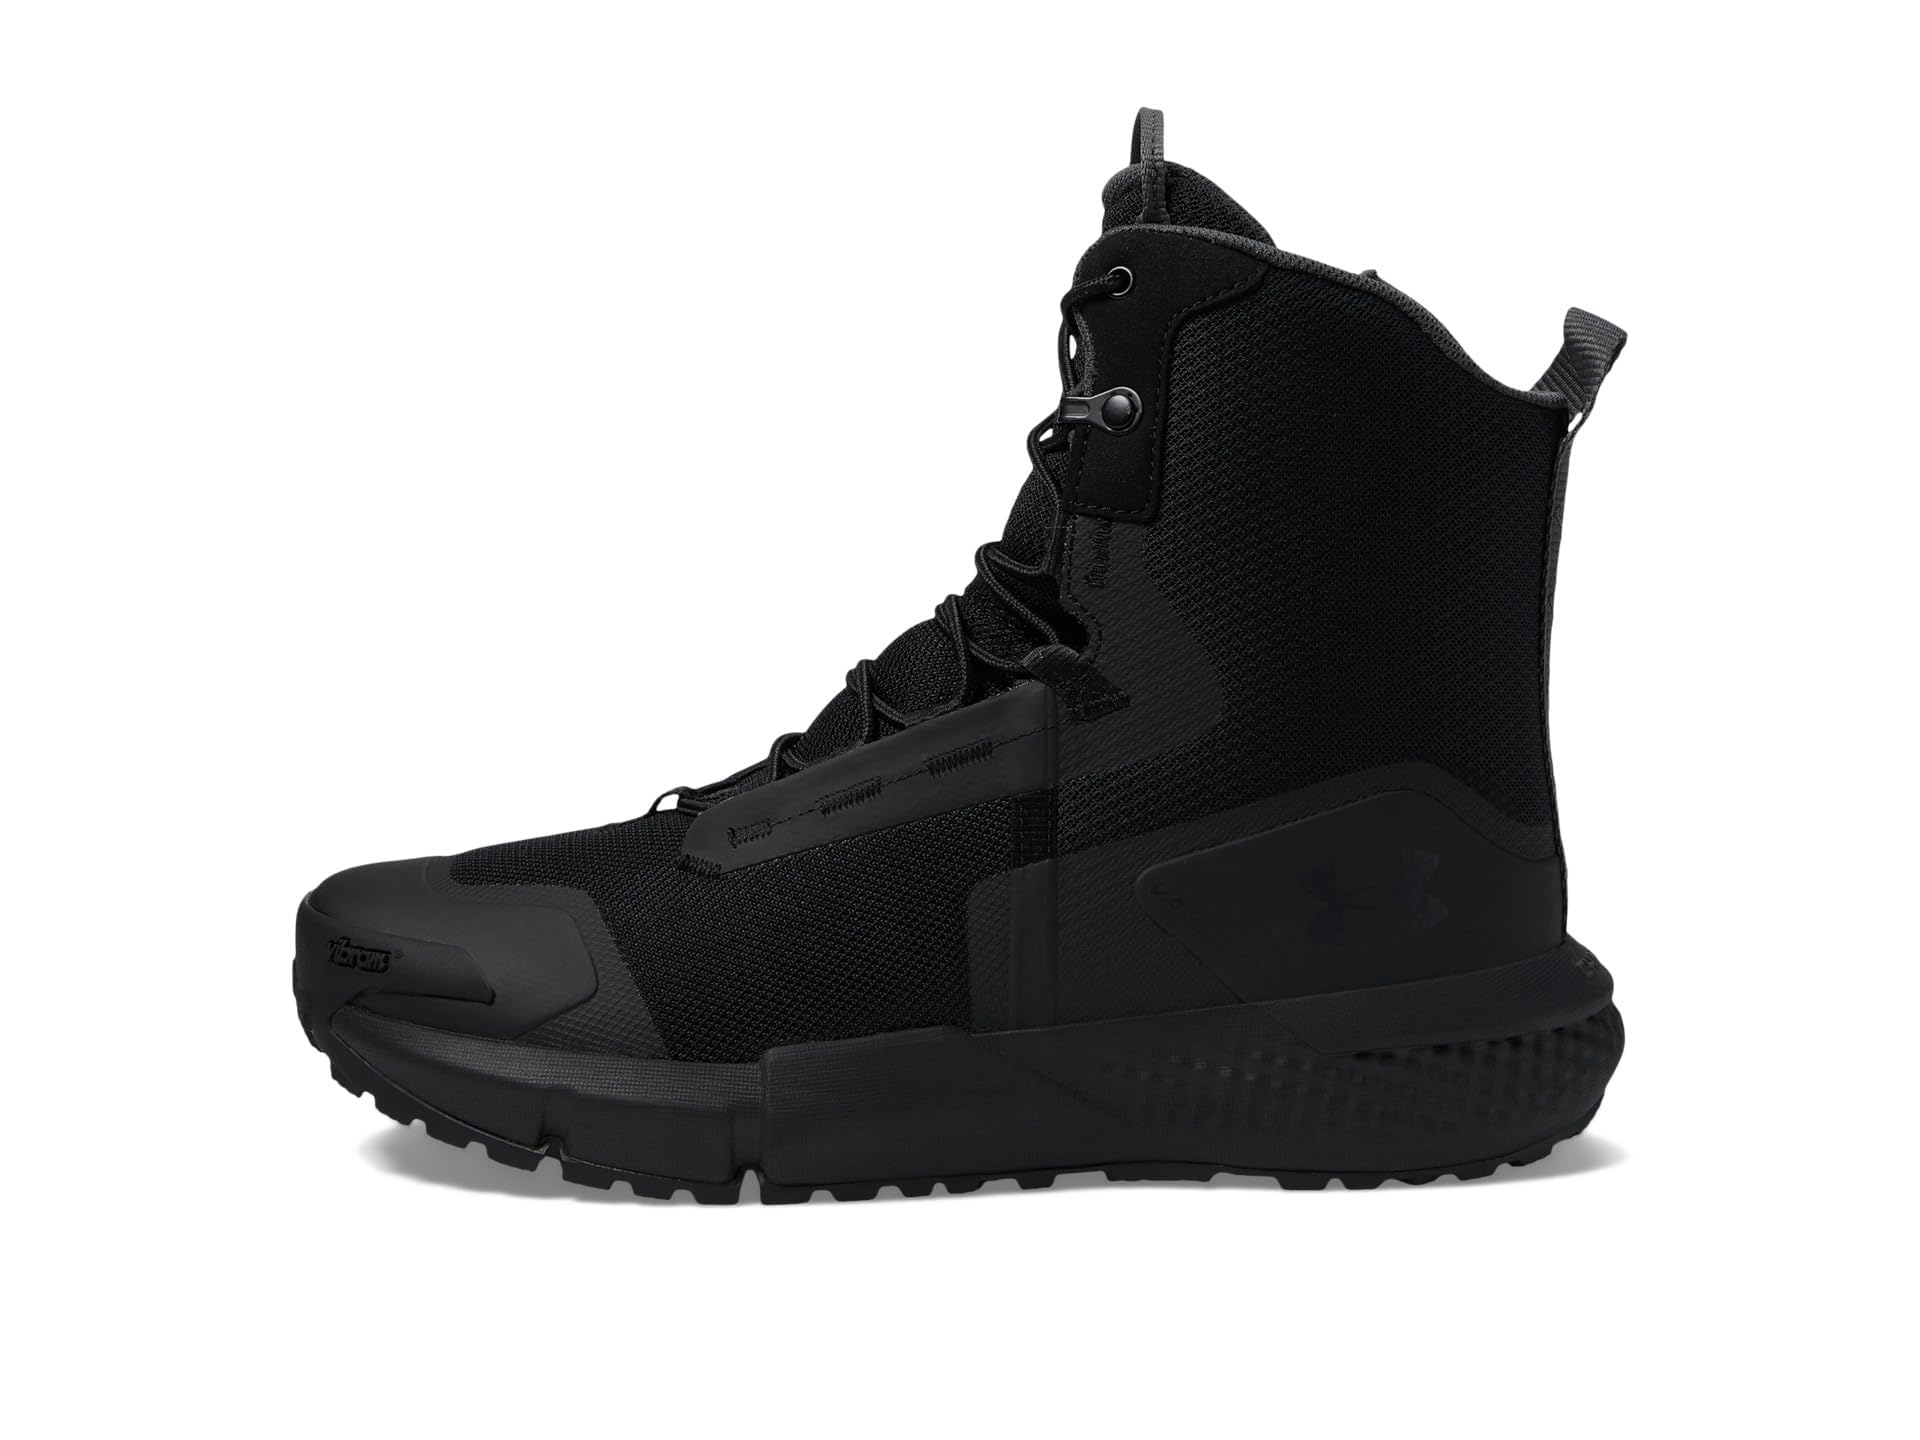 Under Armour Men's Charged Valsetz Zip Military and Tactical Boot